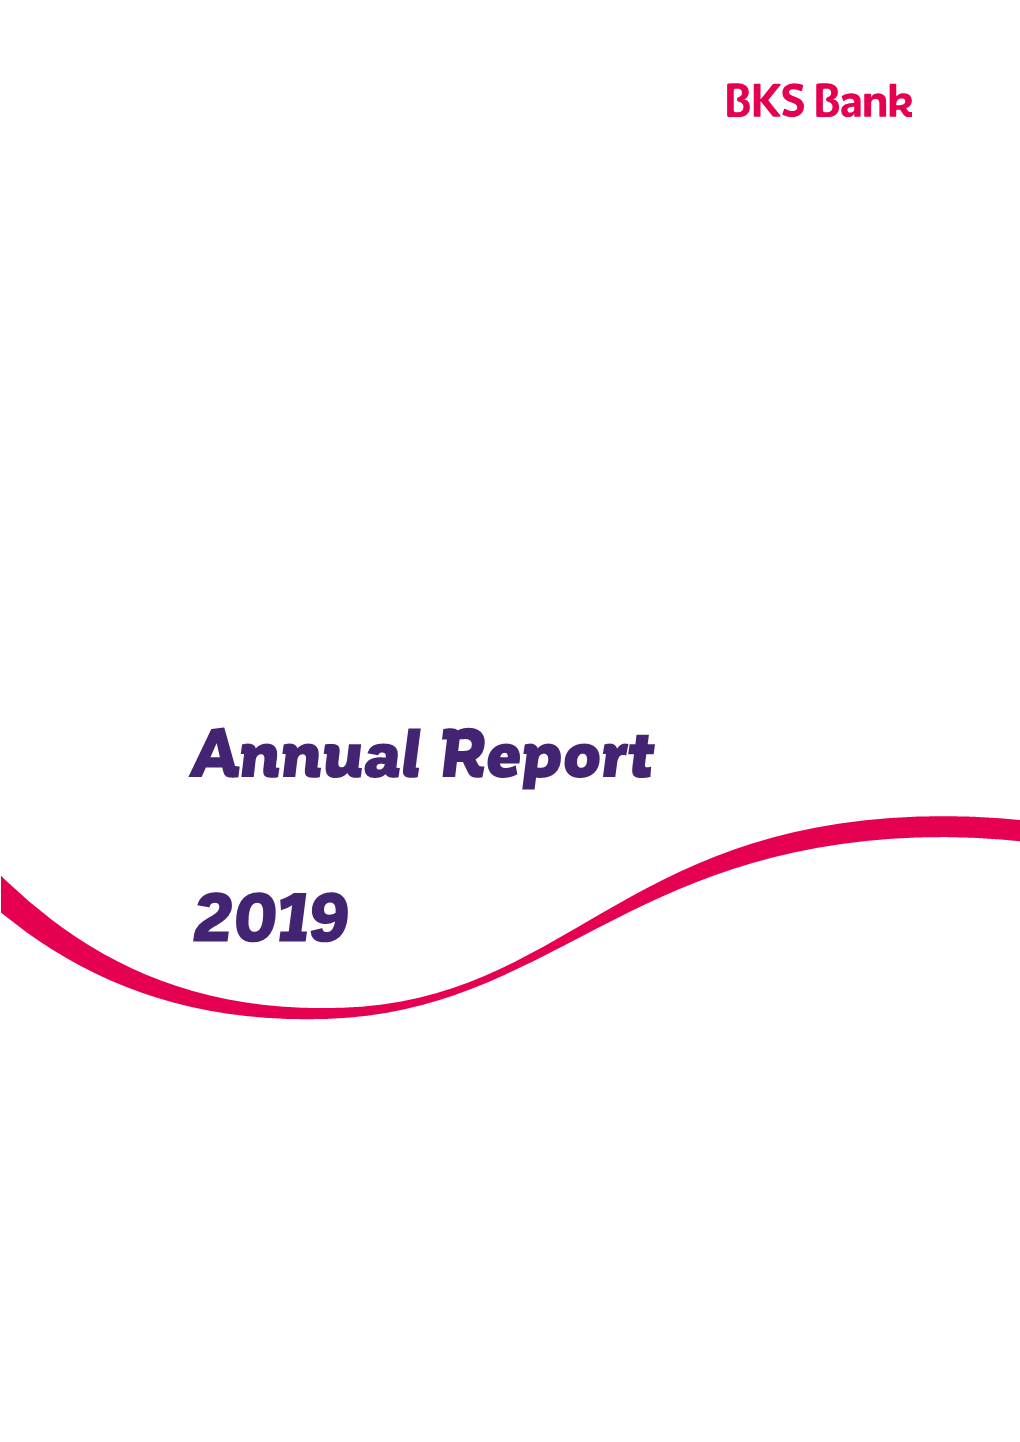 Annual Report 2019 Starting on Page 159